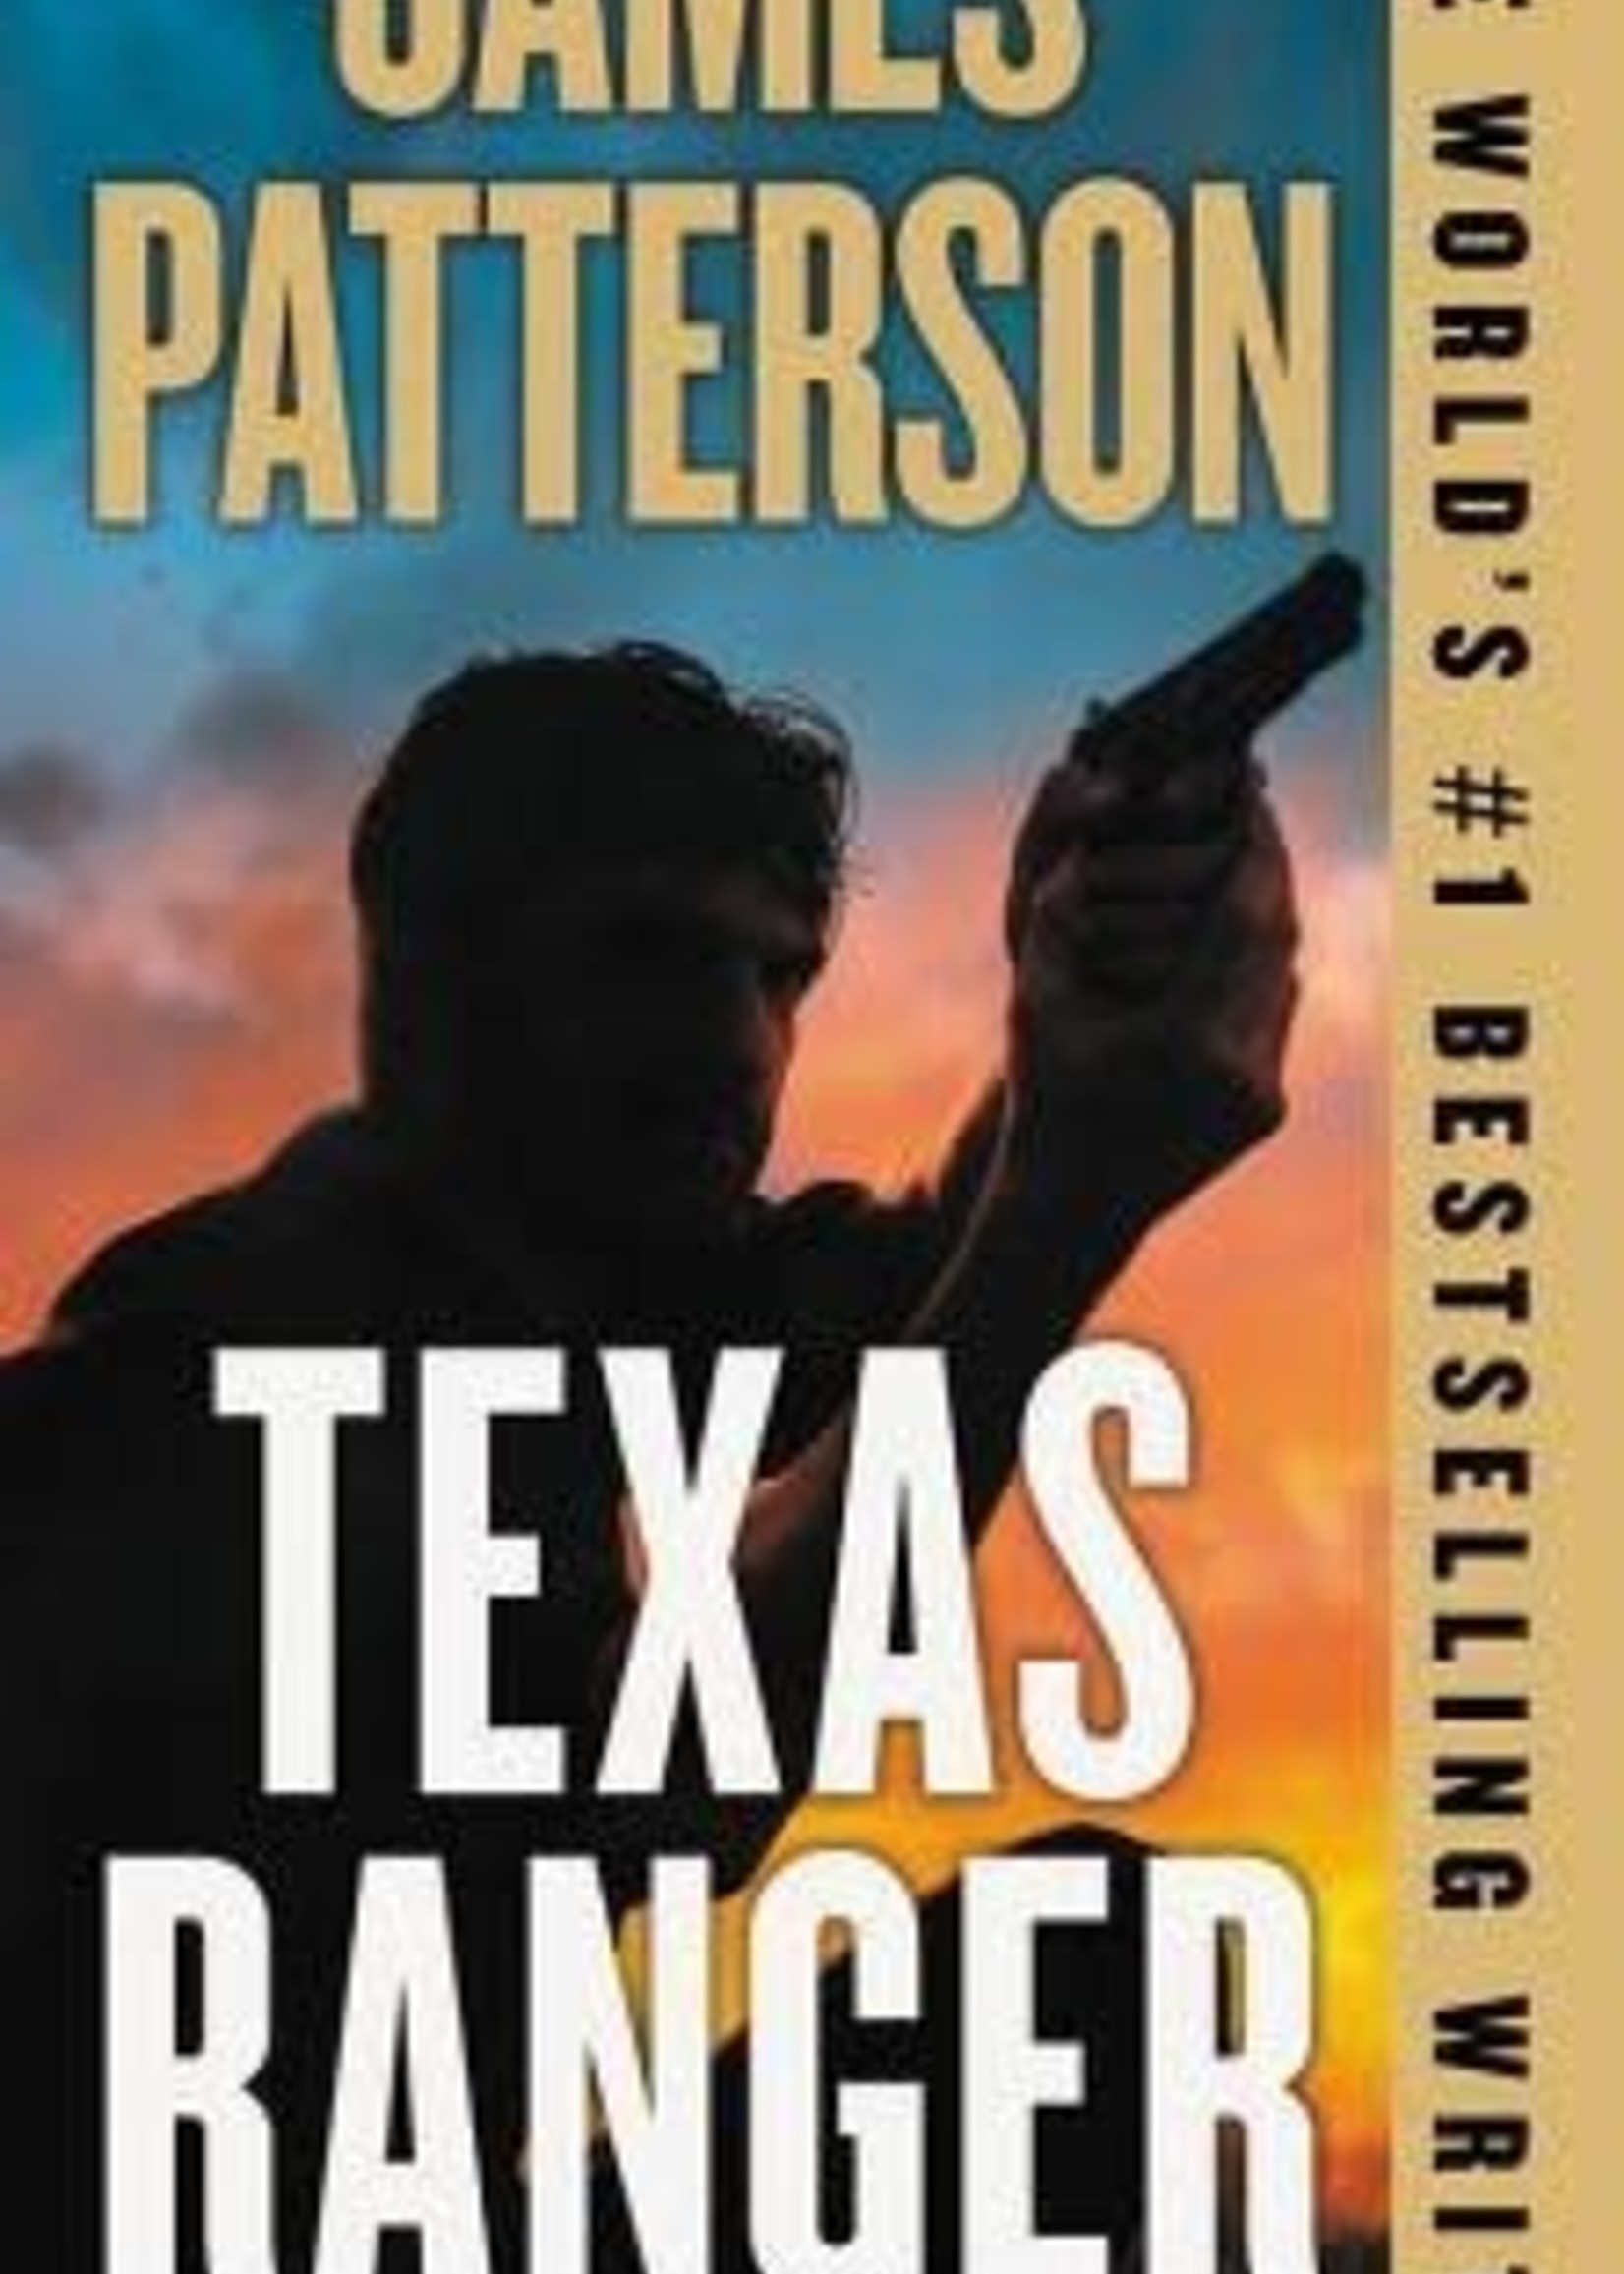 Texas Ranger (Rory Yates #1) by James Patterson